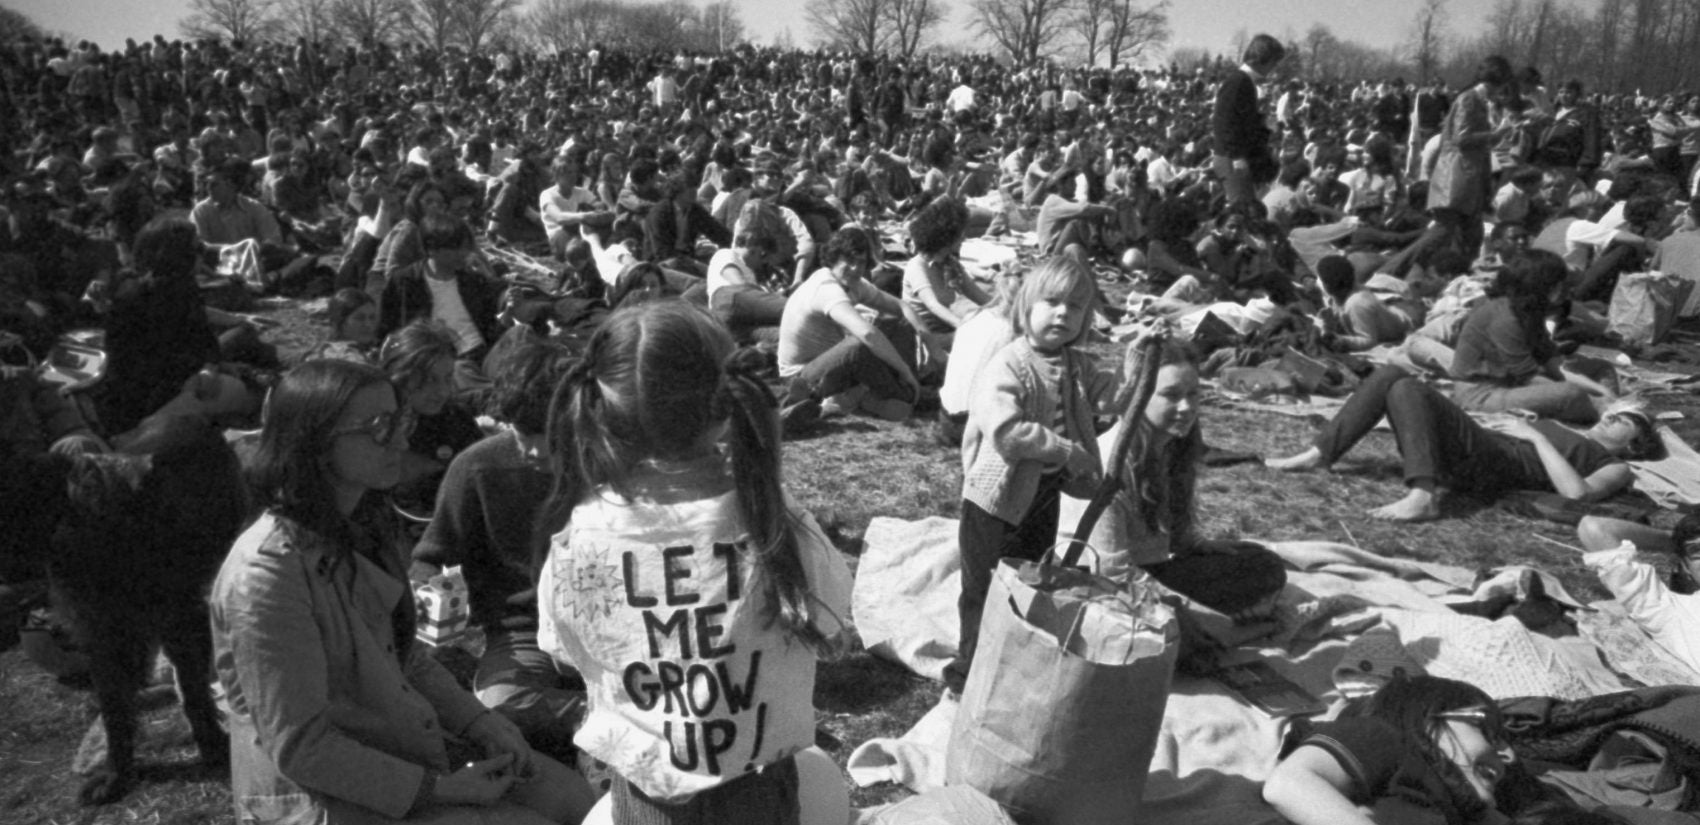 Earth Week crowd in Philadelphia, including a young girl wearing a 